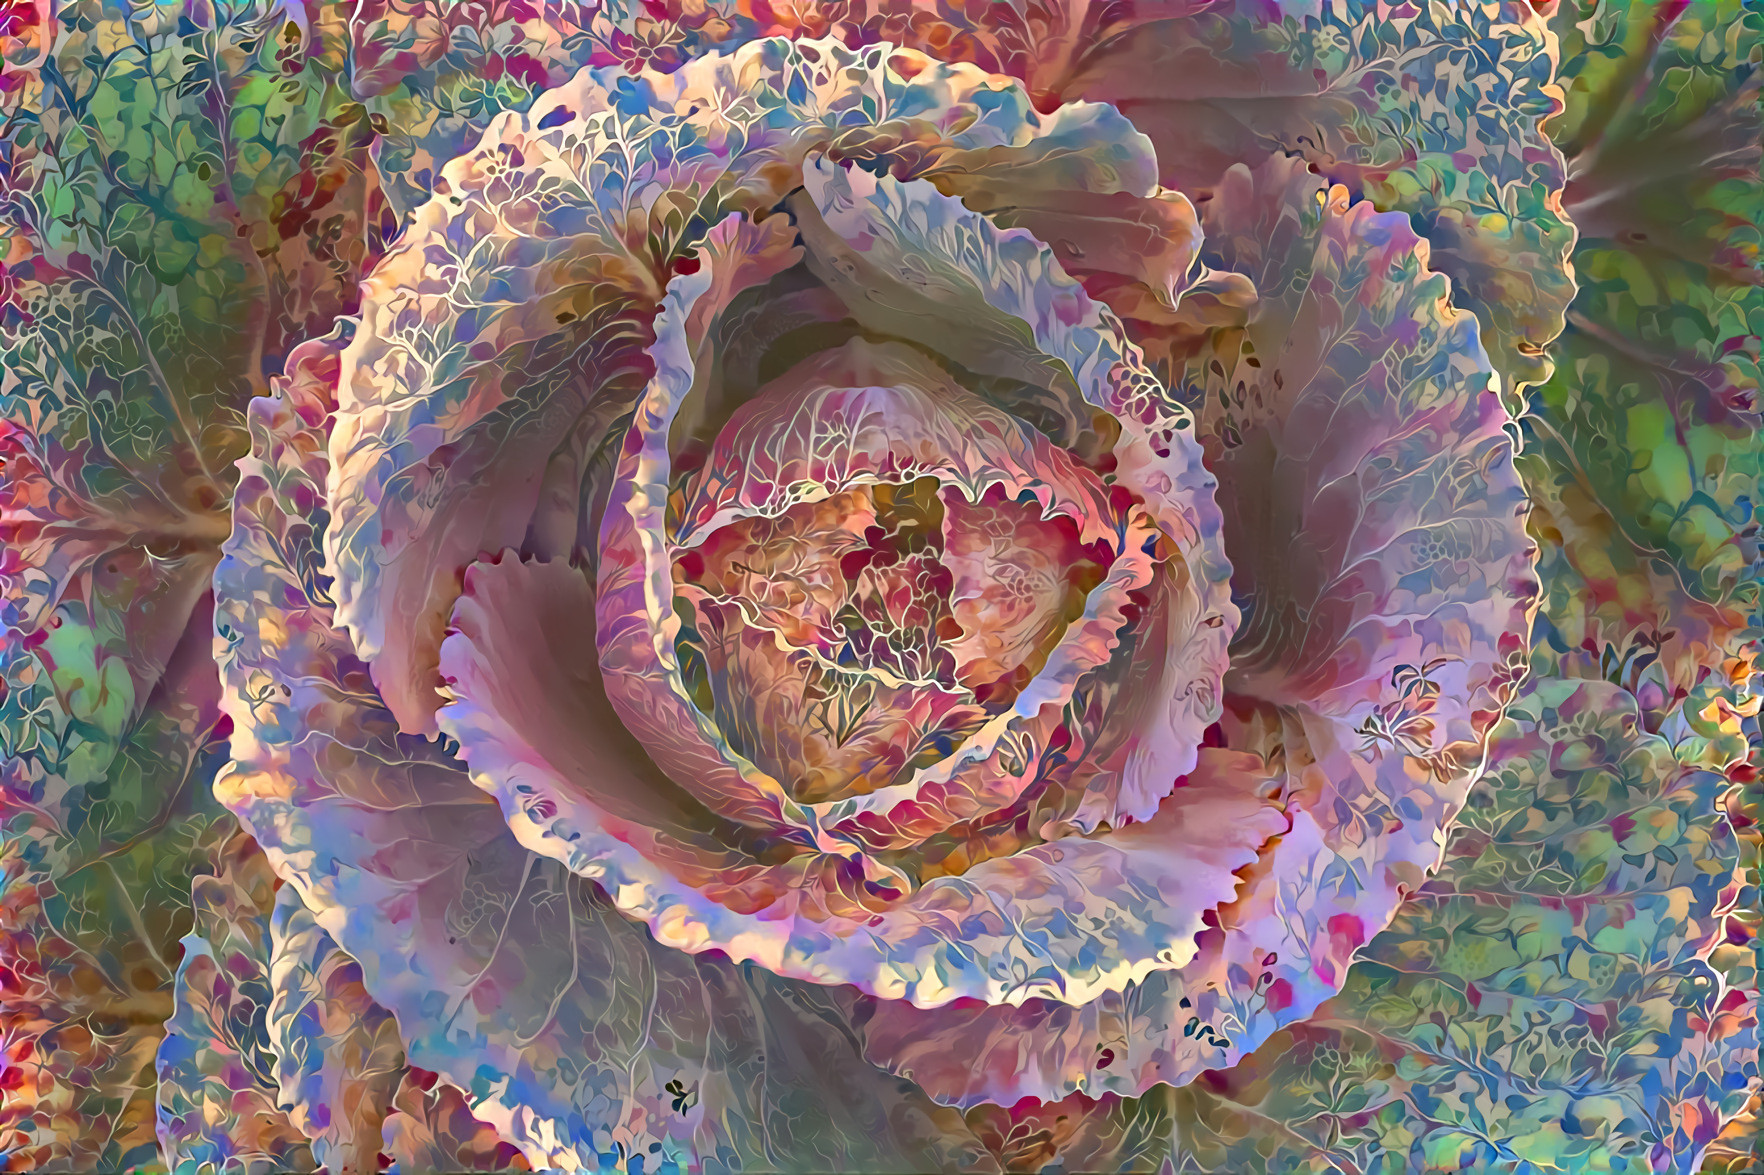 Flowery Cabbage